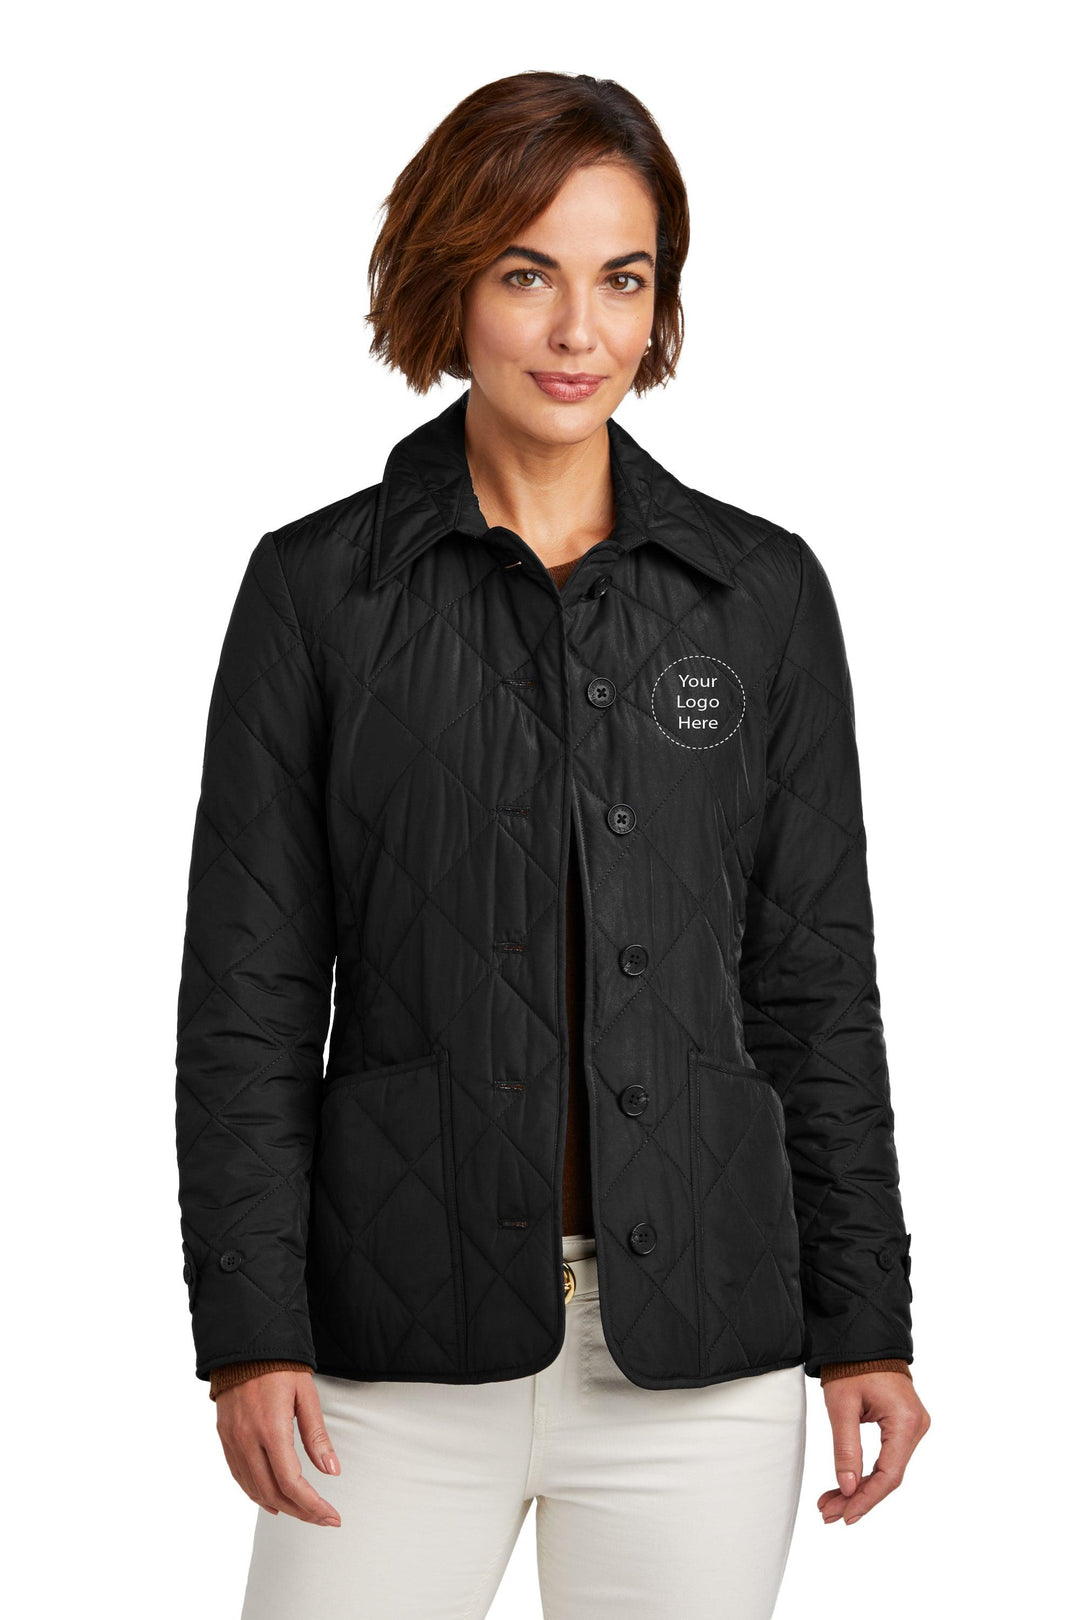 Keller Williams NEW KW-BB18601 Brooks Brothers® Women’s Quilted Jacket 